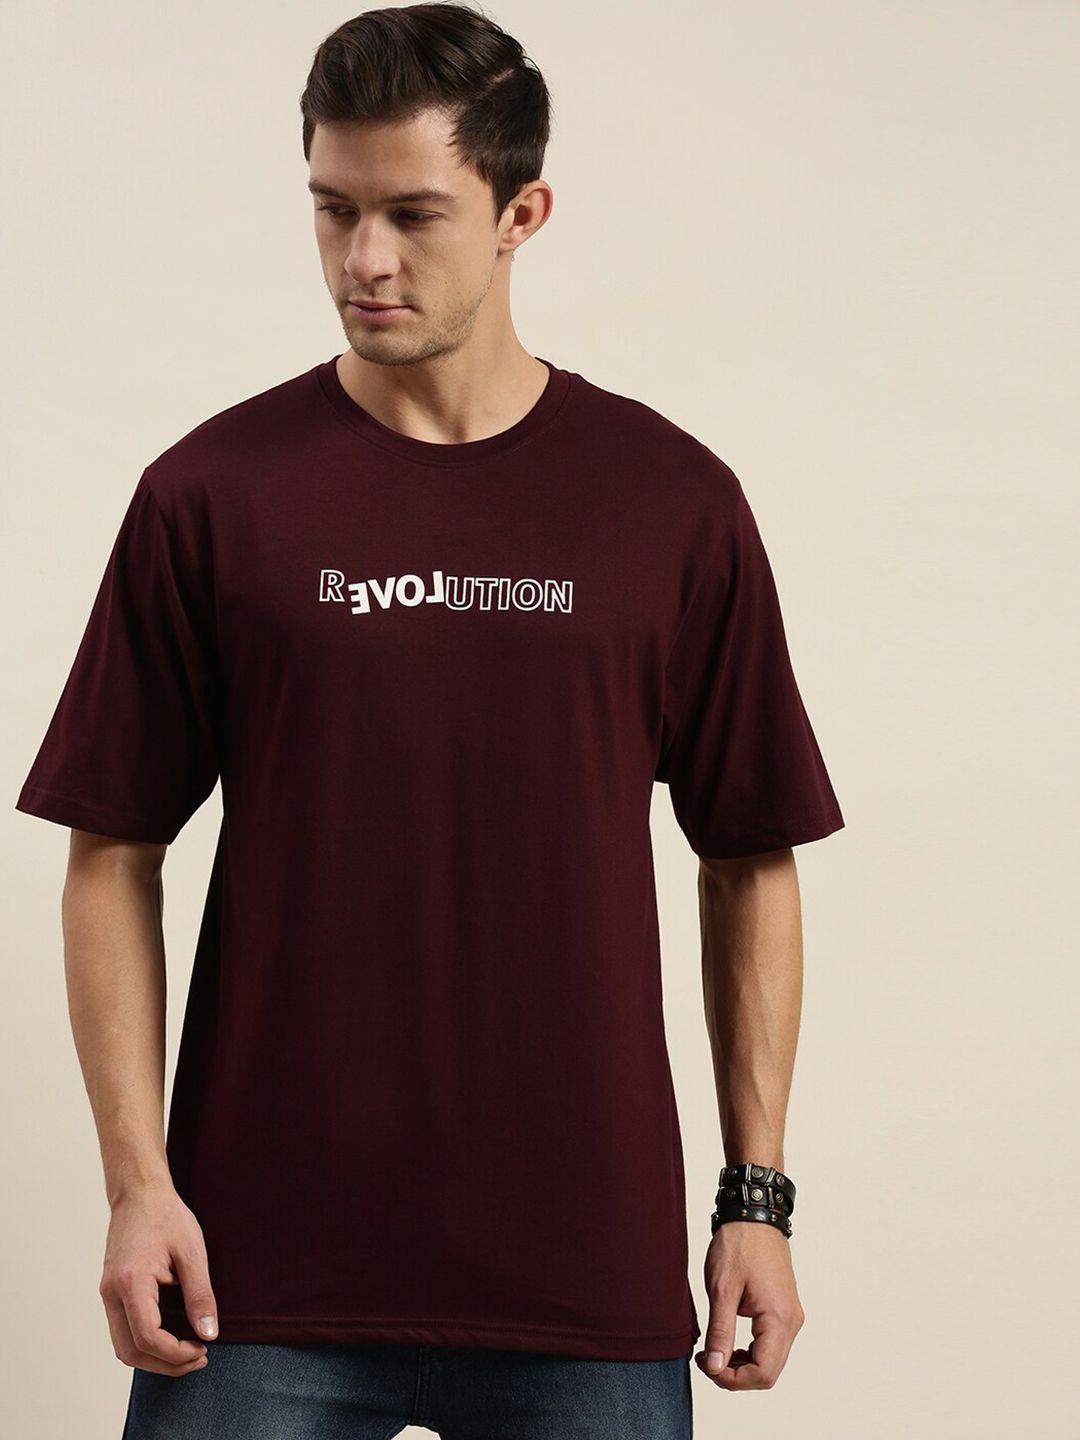 difference of opinion men maroon typography print loose fit t-shirt